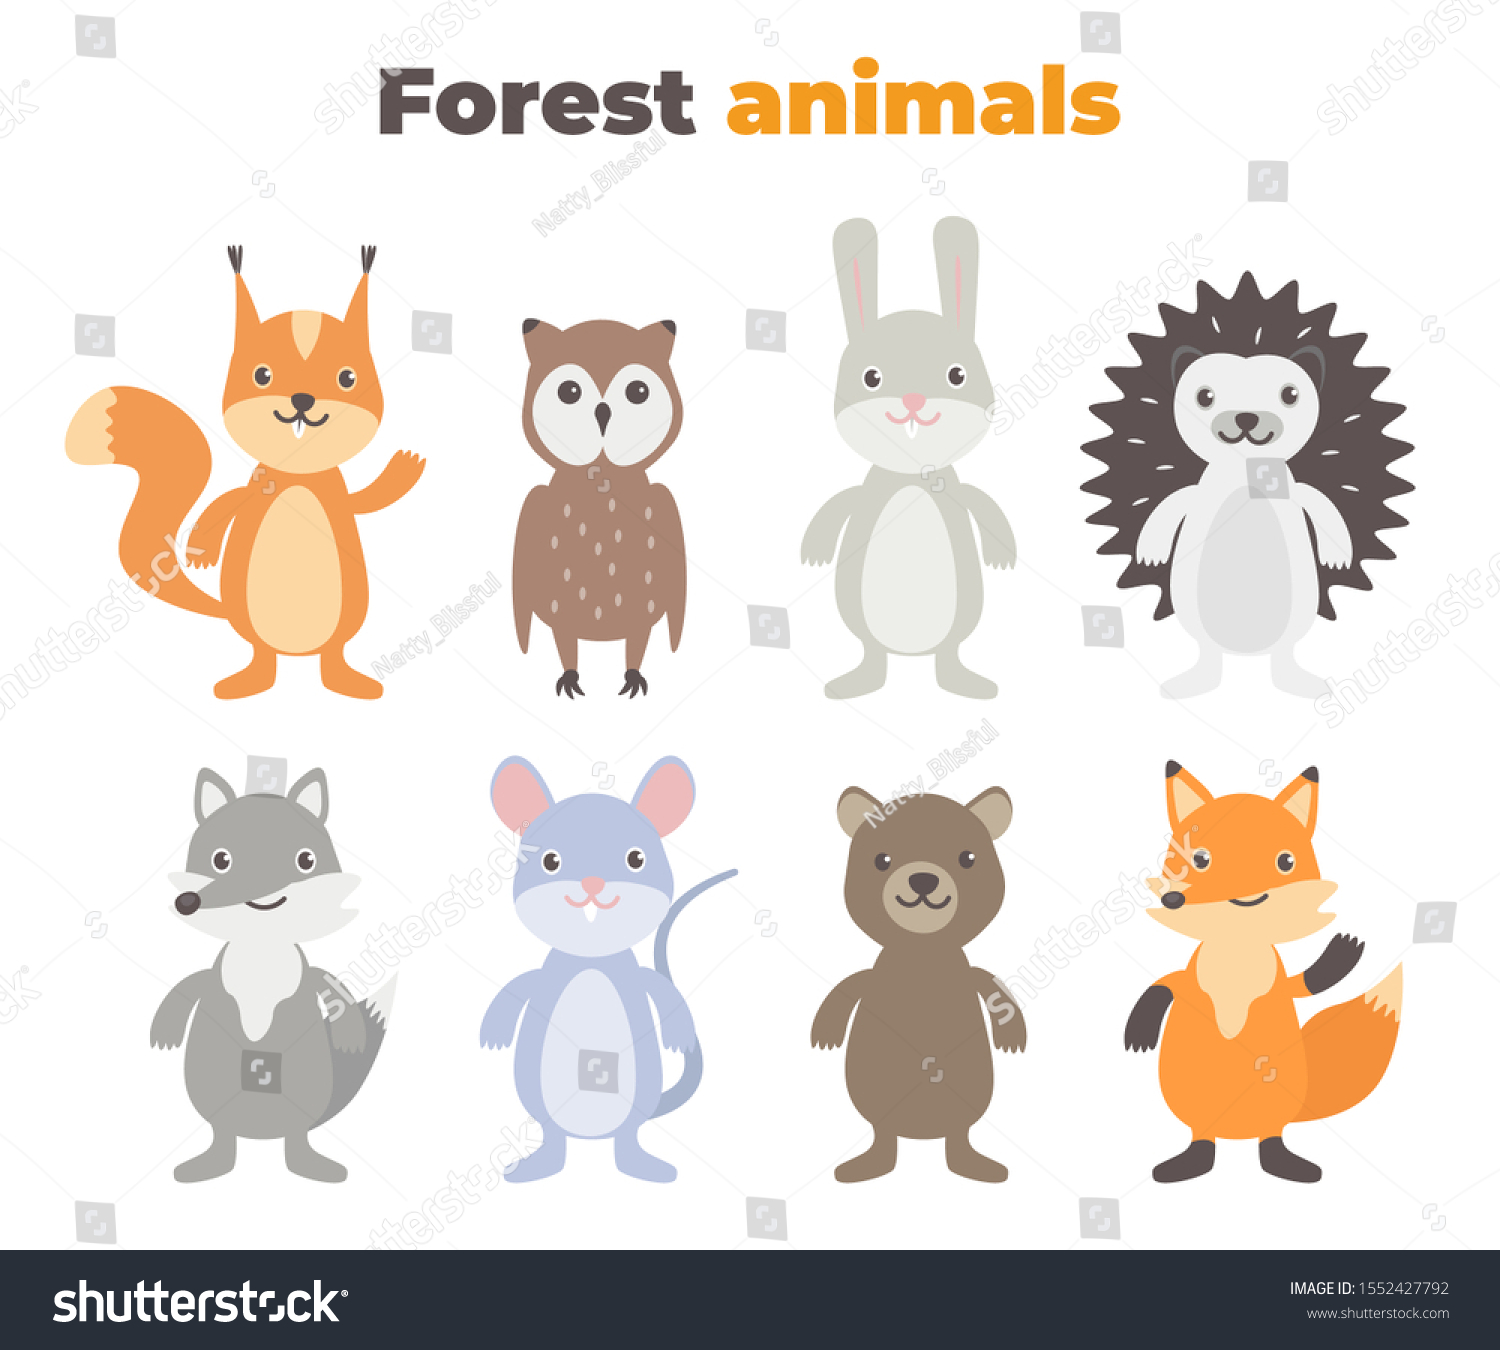 SVG of Cute forest animals set in flat style isolated on white background. Cartoon wild mouse, hedgehog, fox, hare, squirrel, owl, wolf, bear. svg